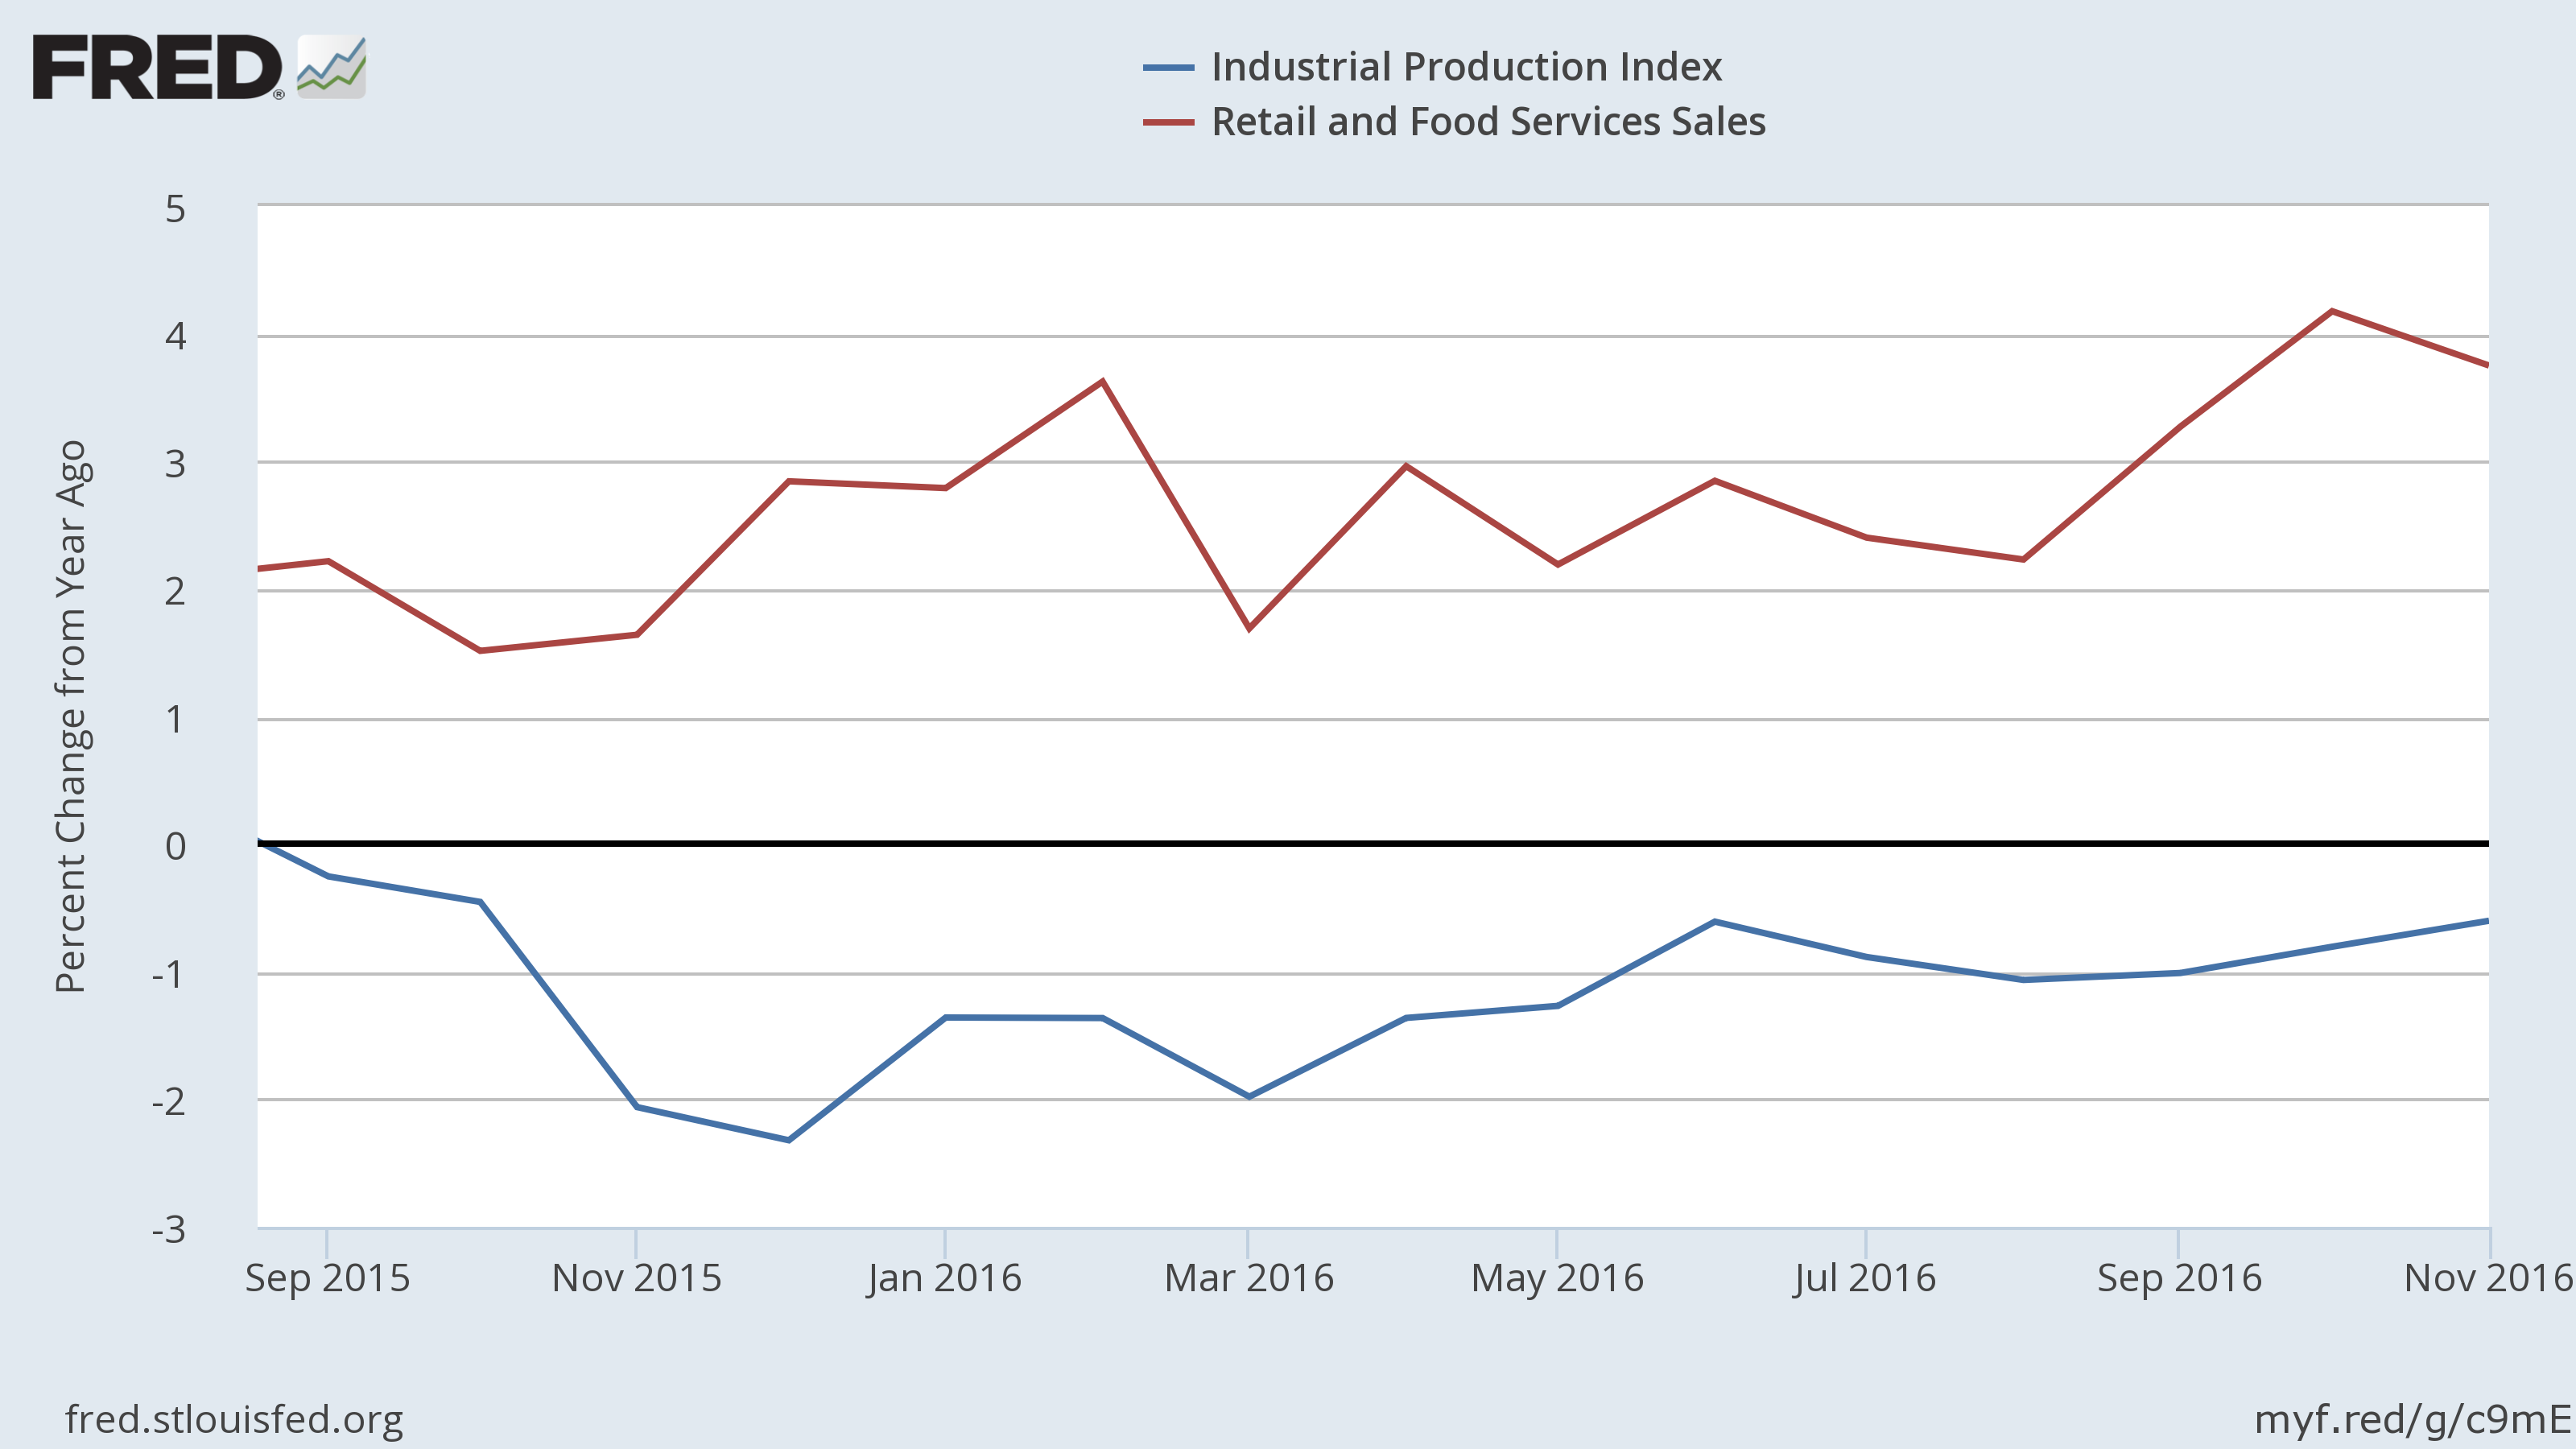 Industrial Production and Retail Sales